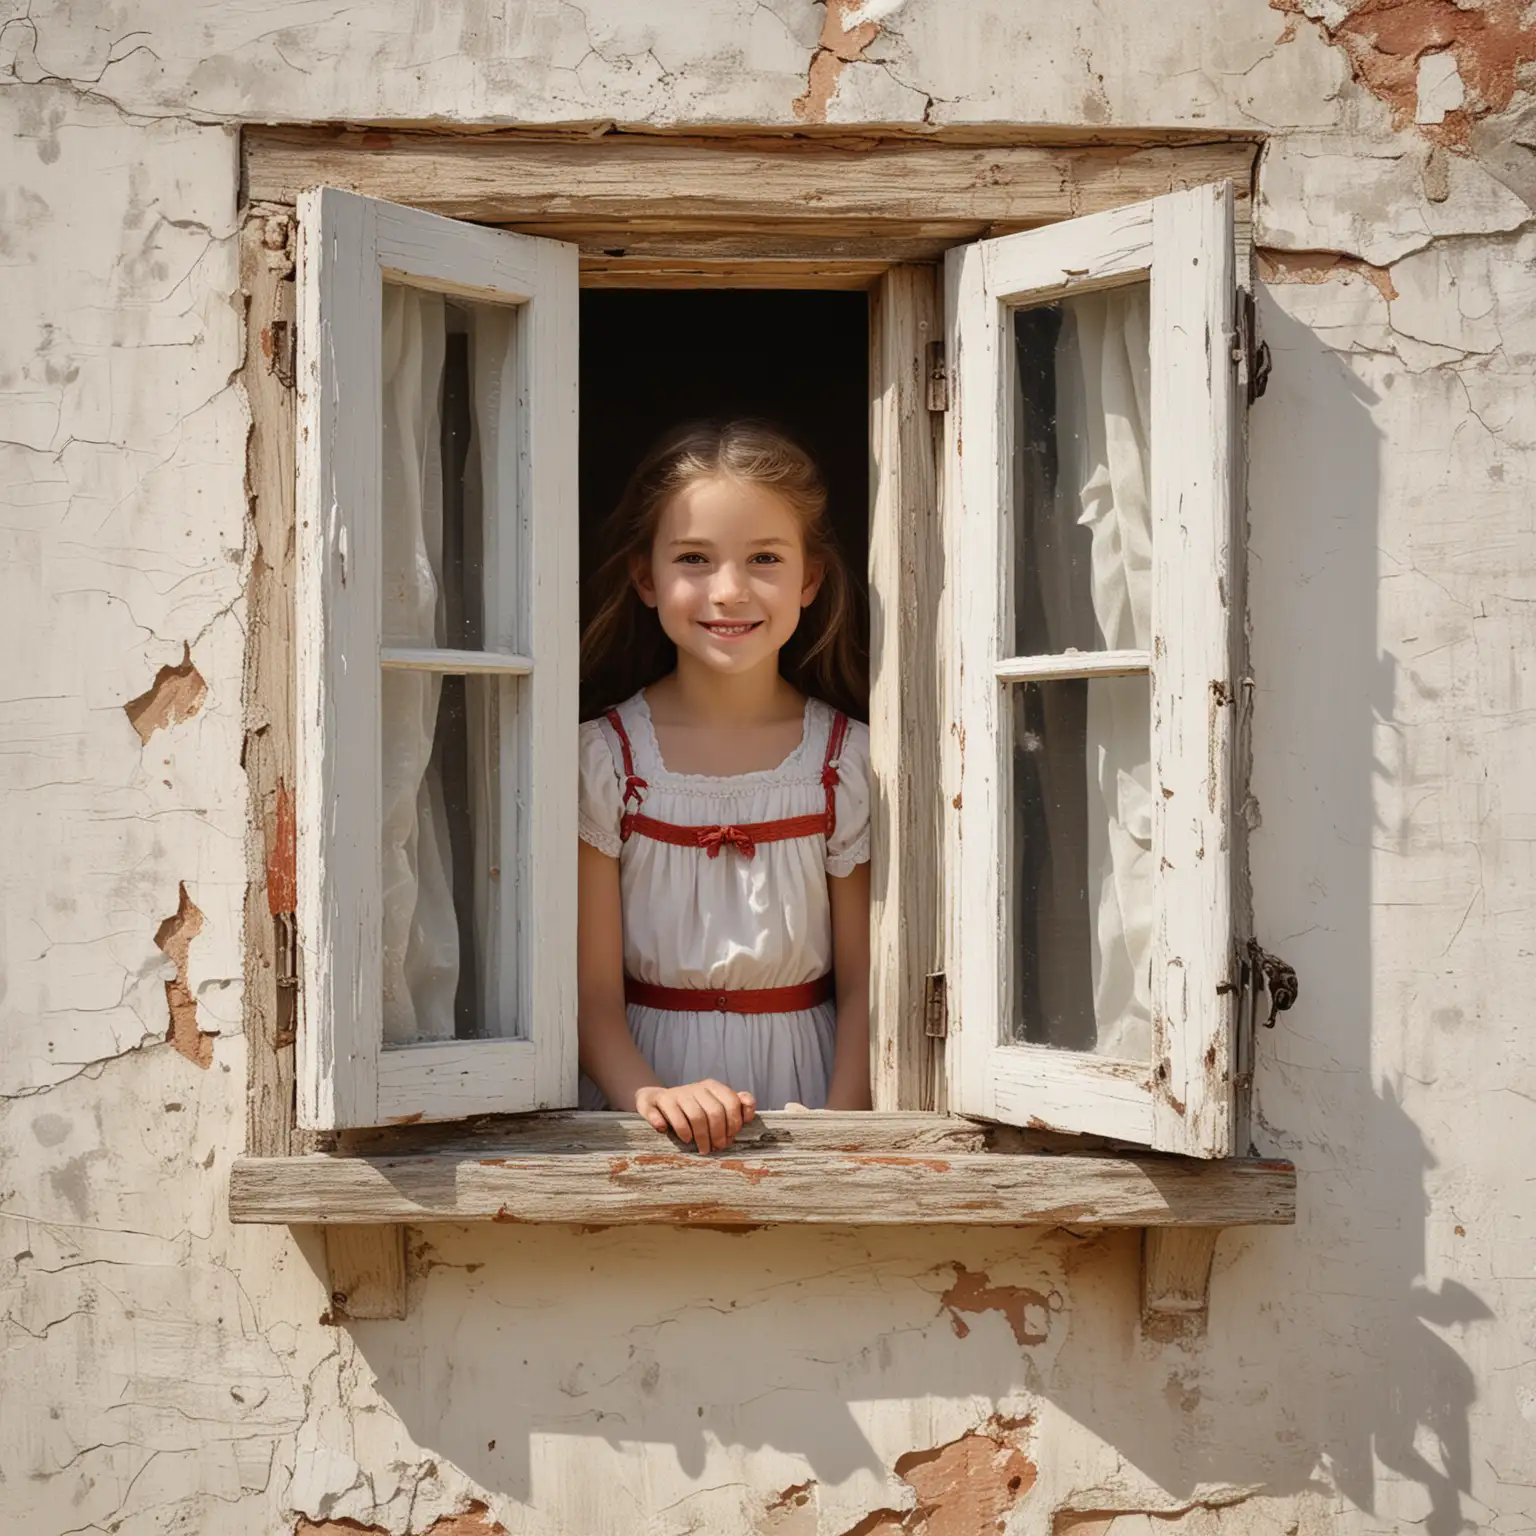 A small smiling young girl looking out of a quaint, picturesque open window set into a rough, textured white stucco wall with patches of wear and chipped paint revealing layers beneath. The window frame is wooden and painted a weathered red which add to the rustic charm. Soft shadows gently drape over the scene, suggesting a warm, sunny day. The image is rendered in a painterly style, with visible brushstrokes that blend the colors gently and give the entire scene a dreamy, impressionistic quality. 